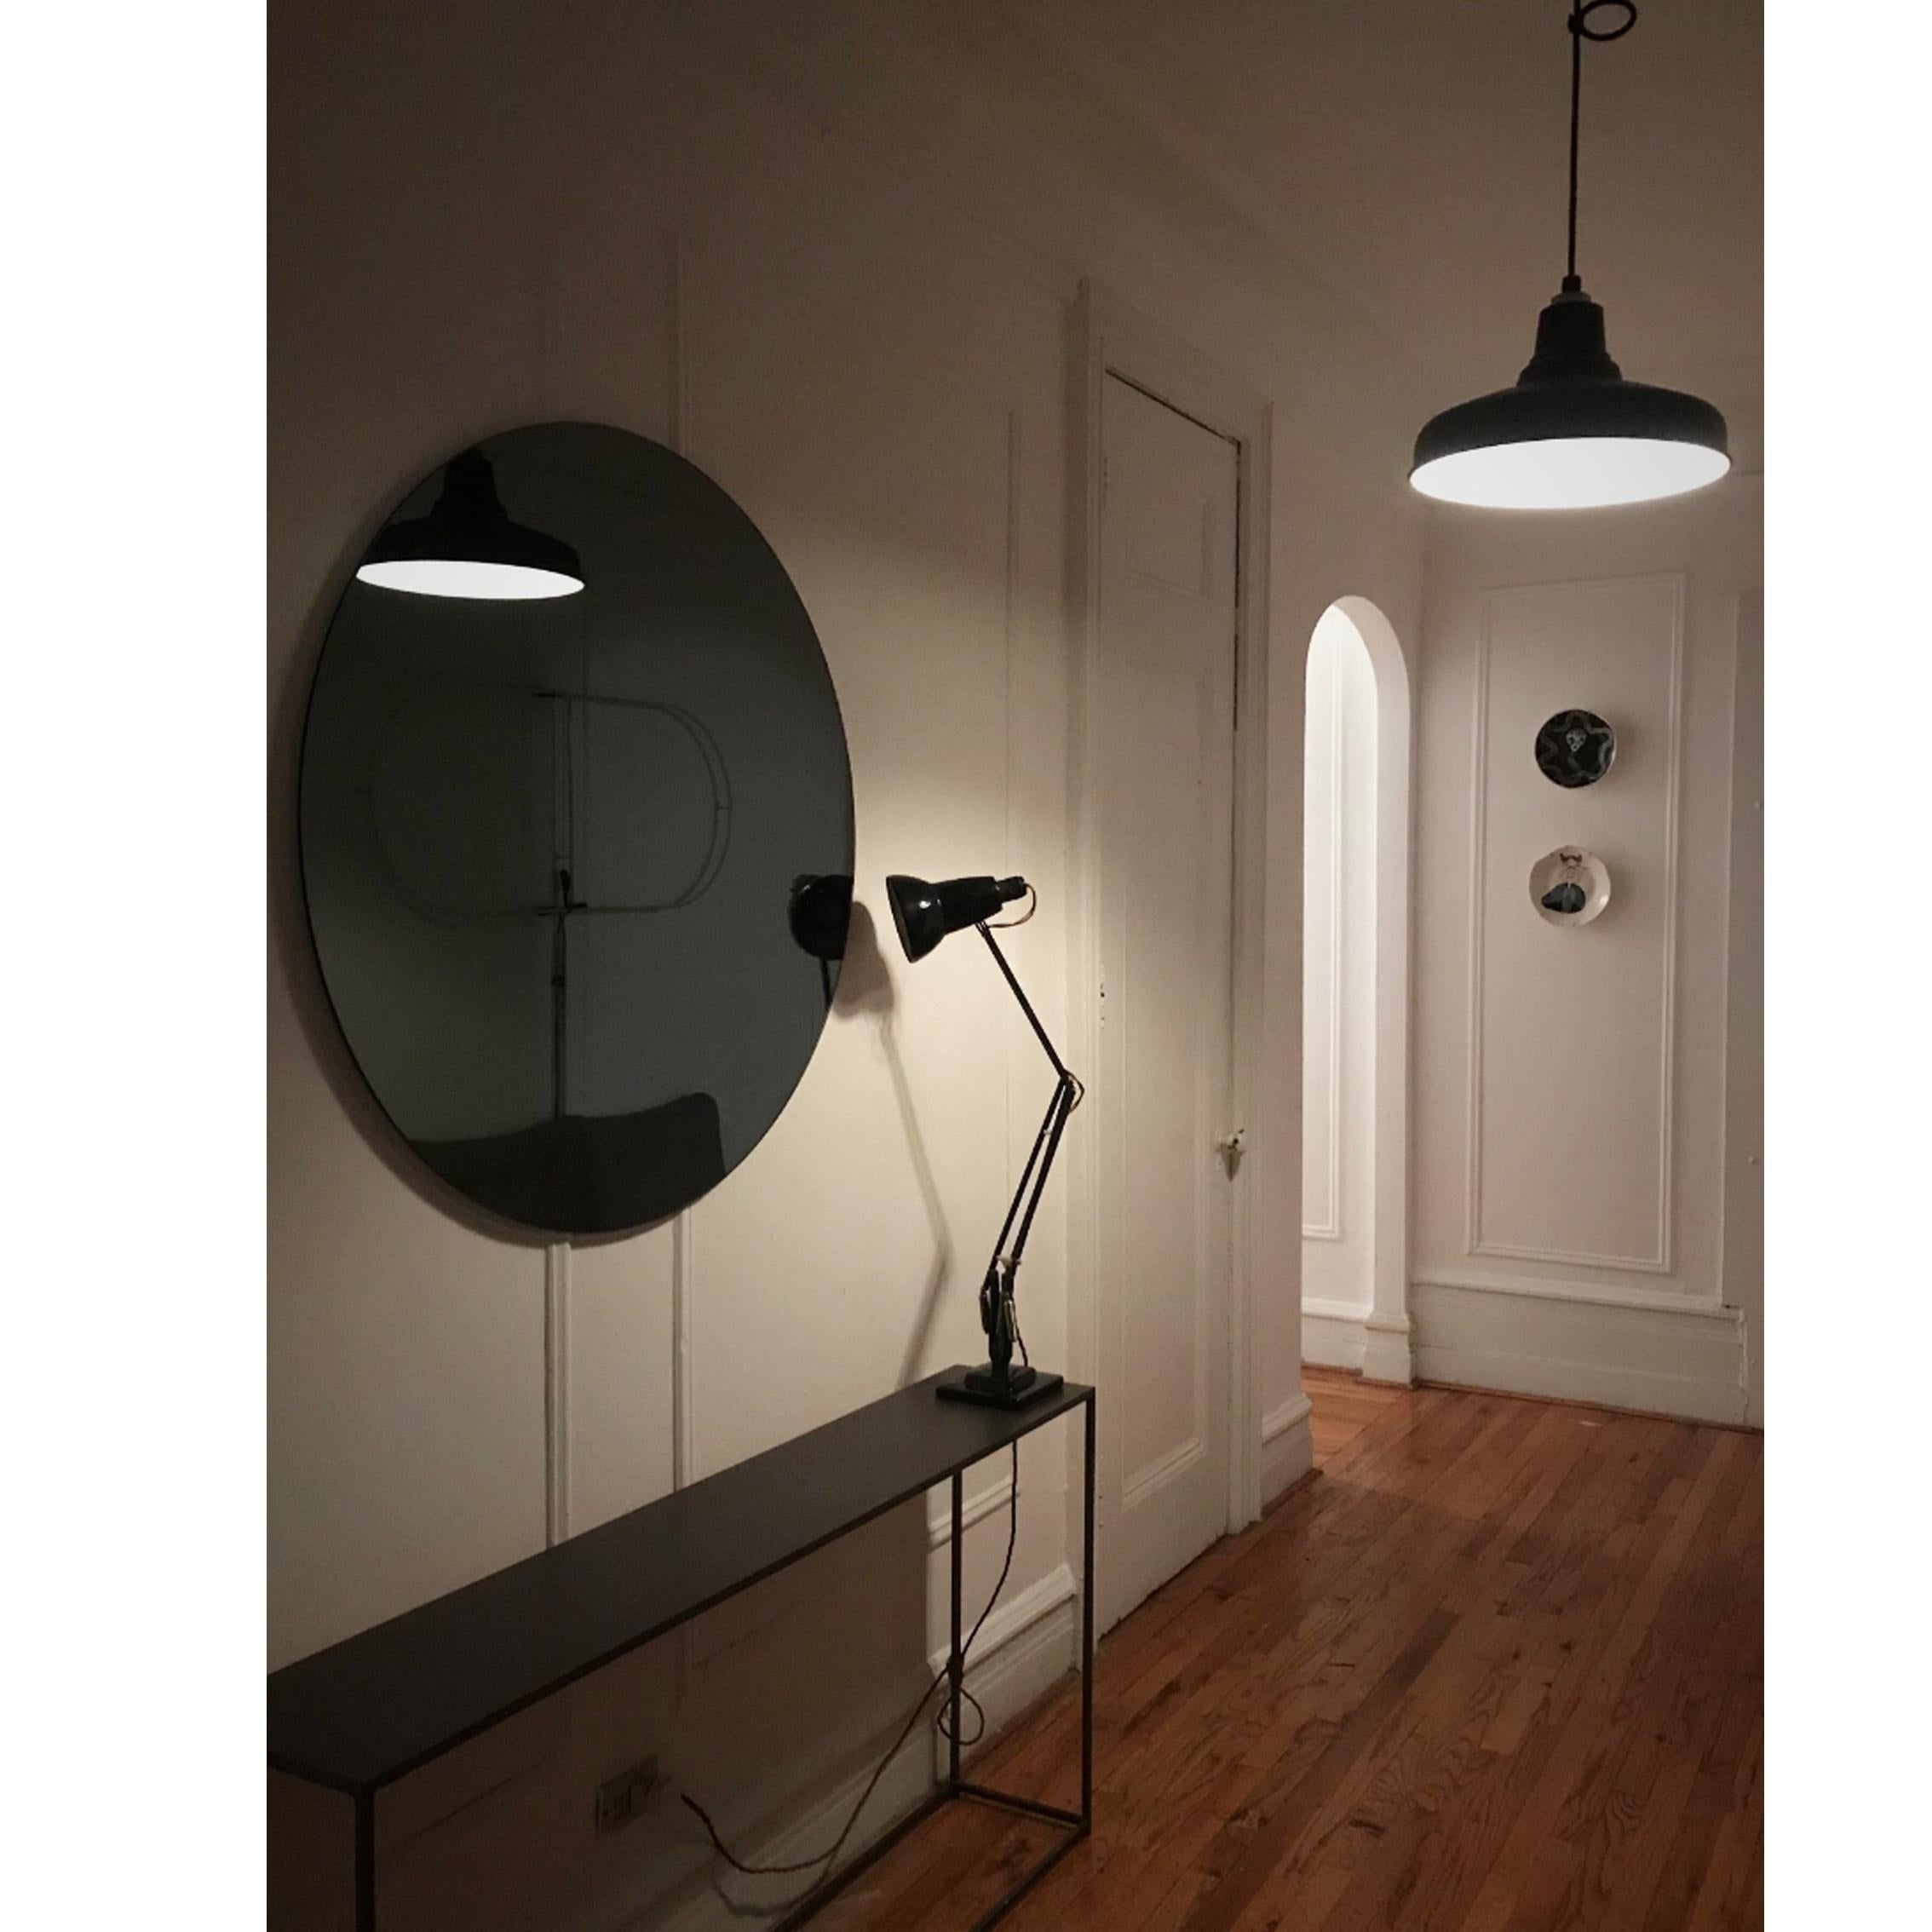 Orbis Black Tinted Round Frameless Contemporary Mirror, Large For Sale 5